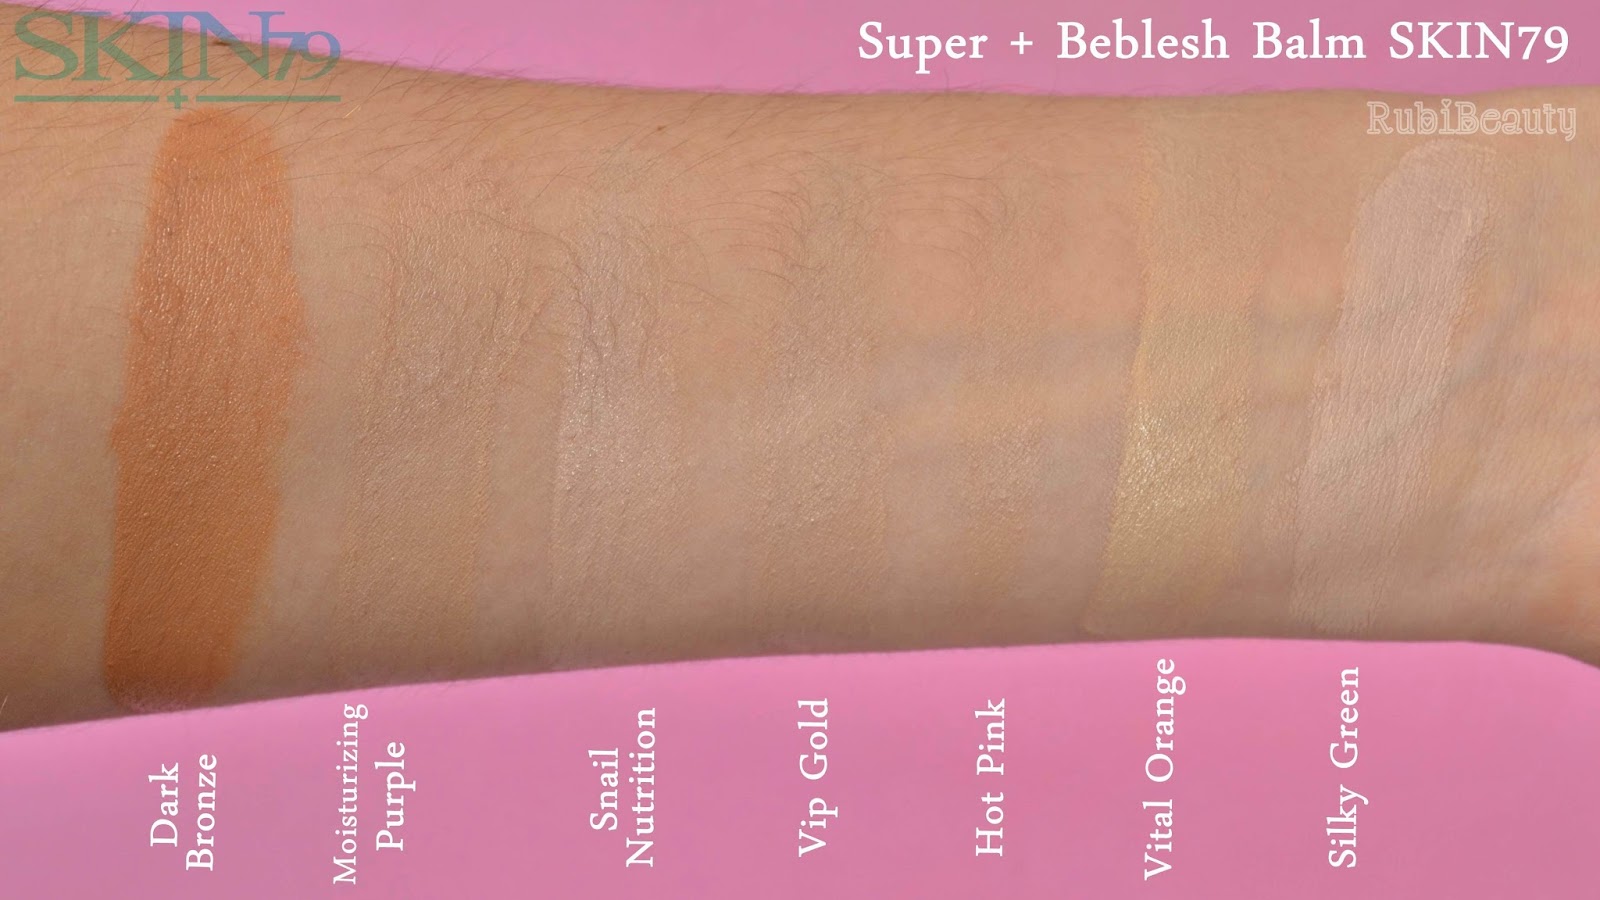 rubibeauty review opinion personal Super + Beblesh Balm BB Cream Skin 79 Swatches Hot pink orange vip gold snail silky purple